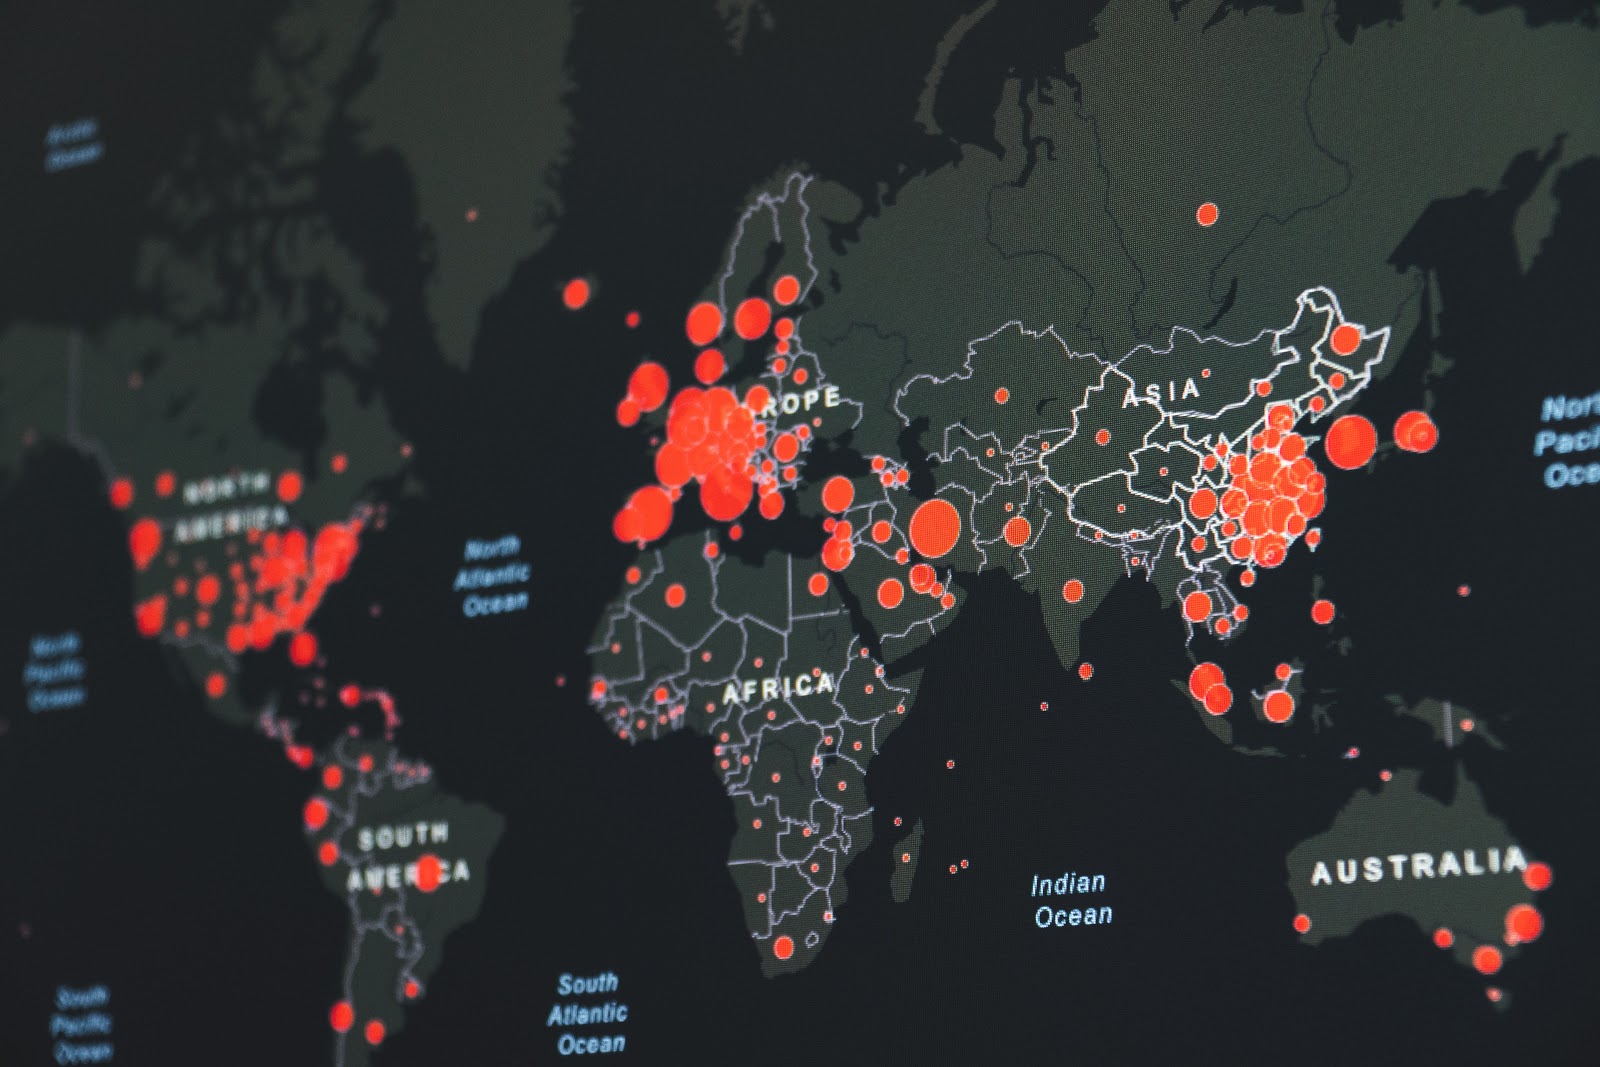 Map of the world where the COVID-19 pandemic has hit which affects app search optimization trends.